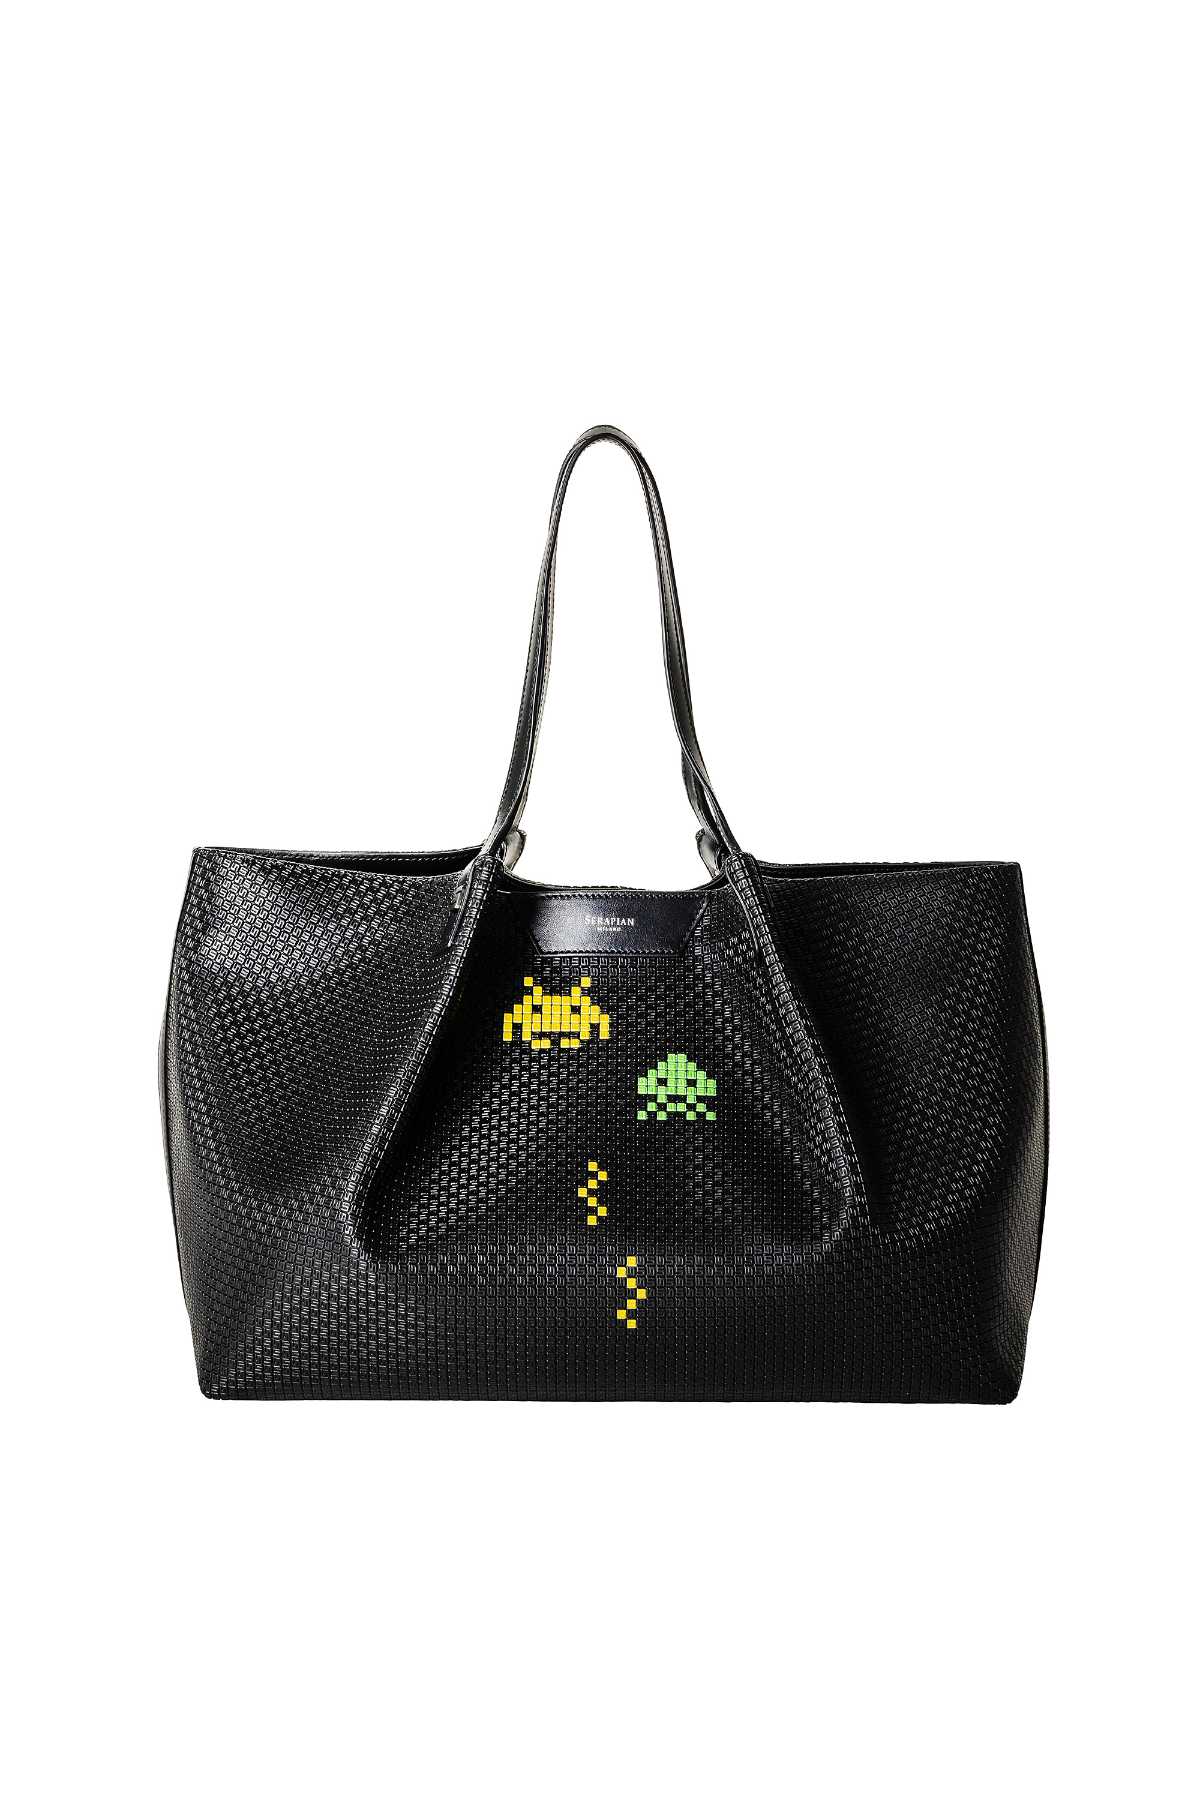 A New Serapian X Space Invaders Collection Now Available In Store